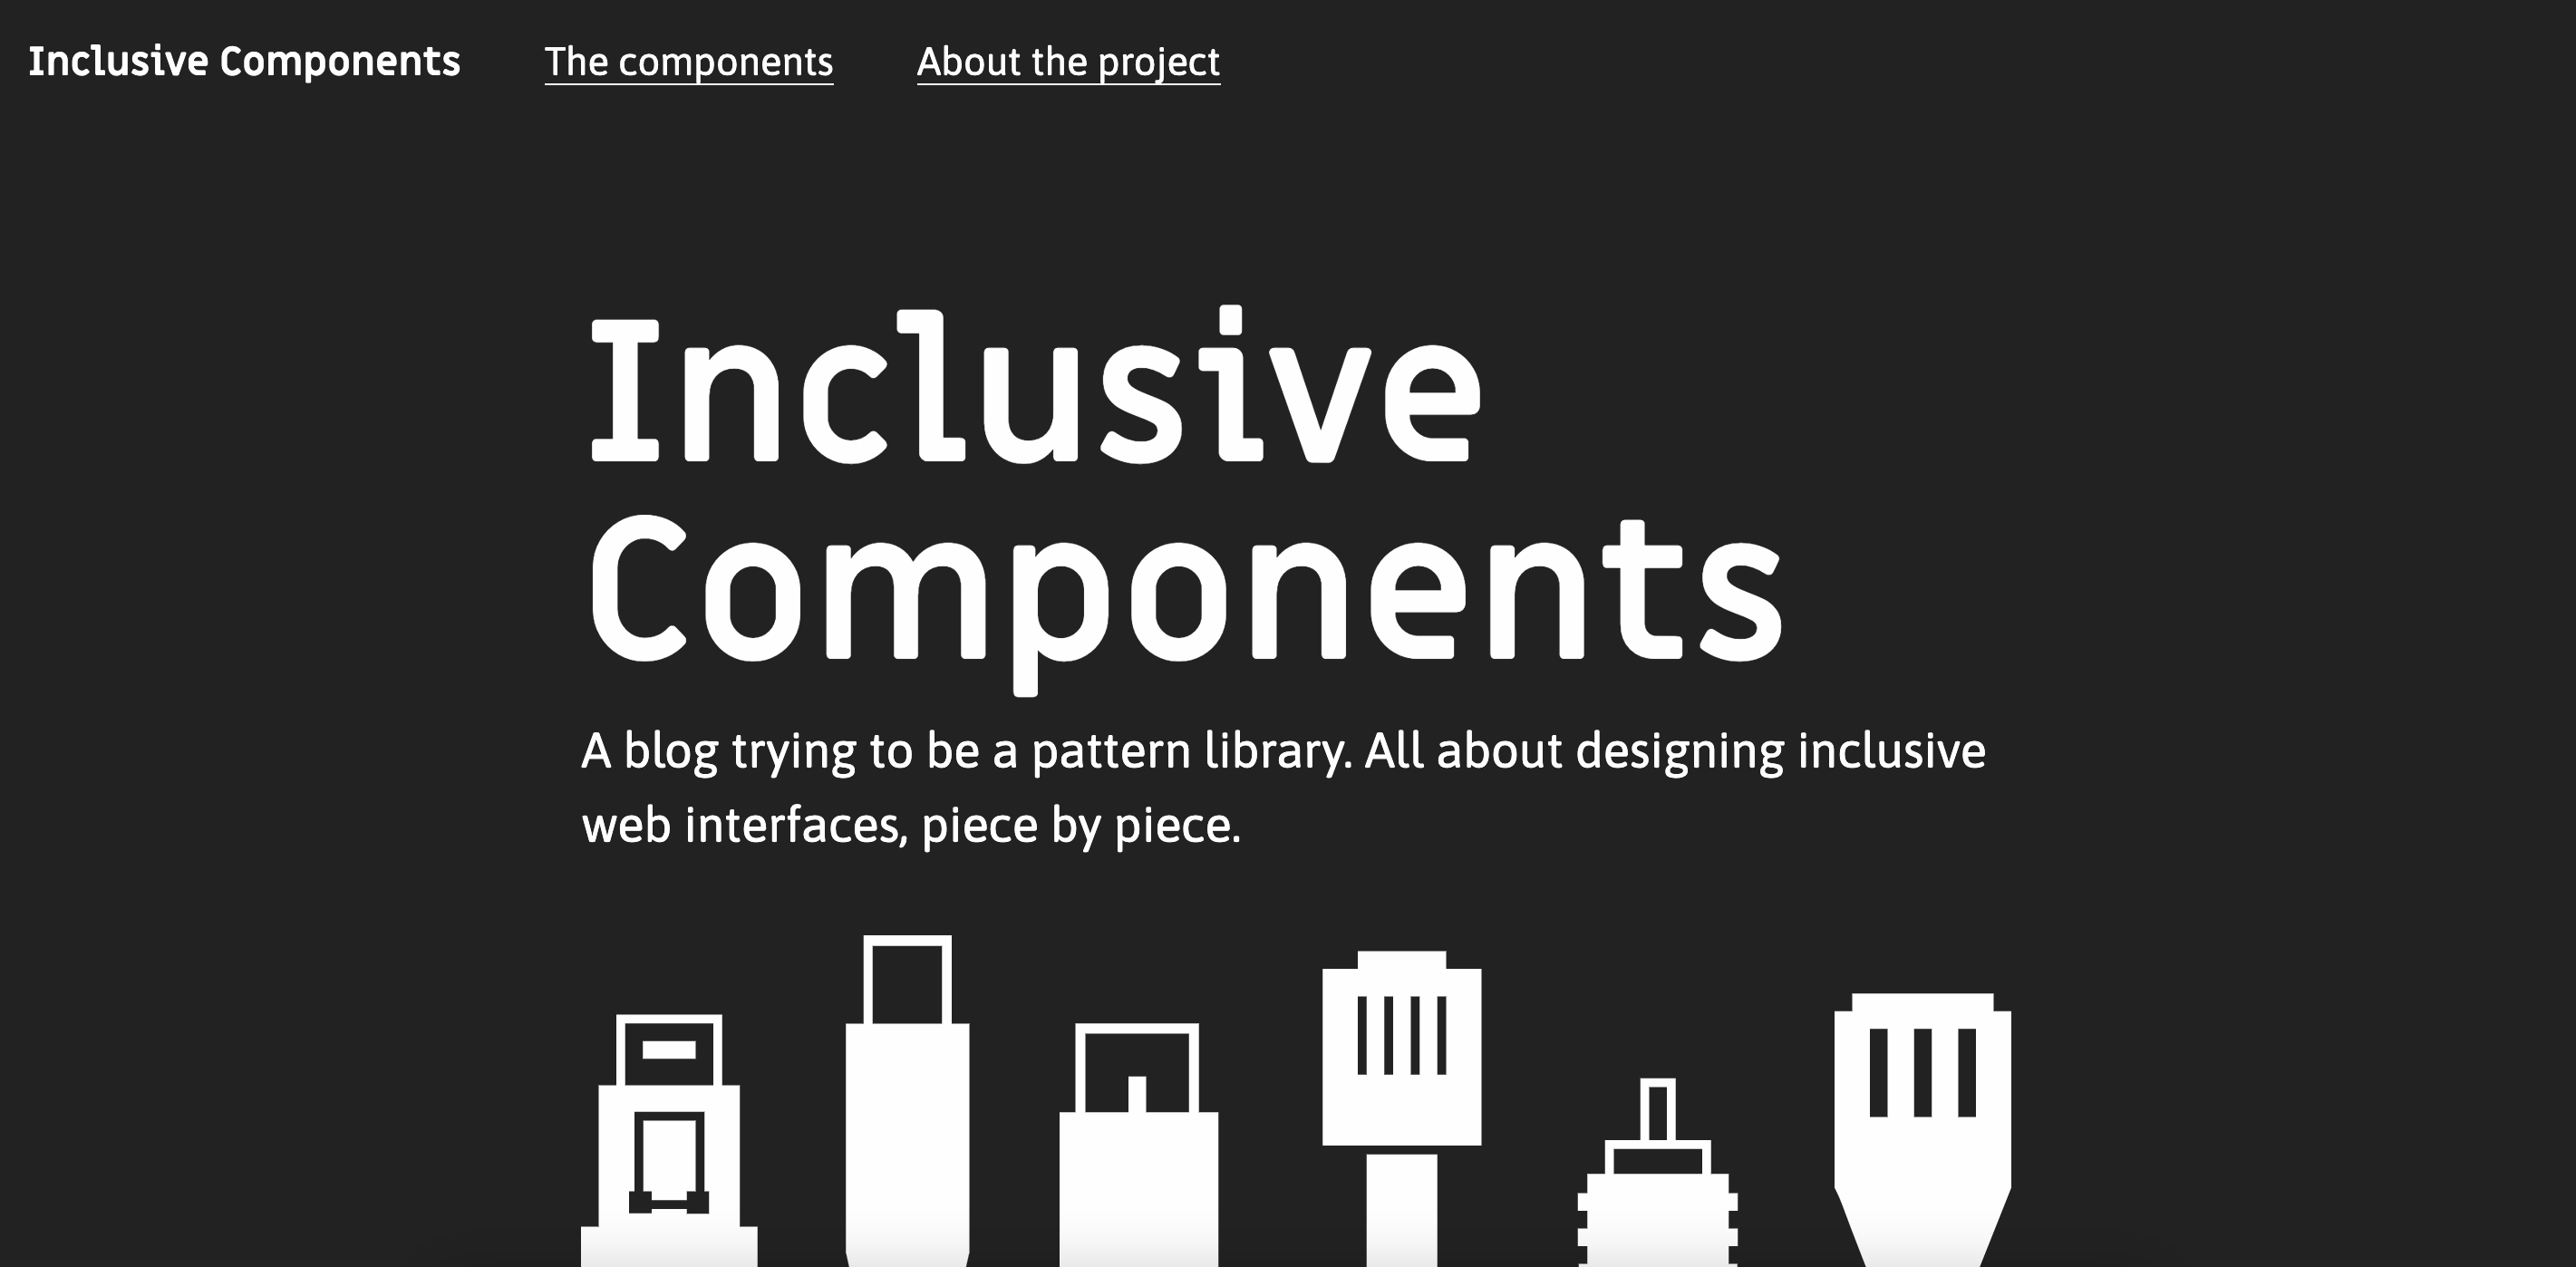 The Inclusive Components homepage